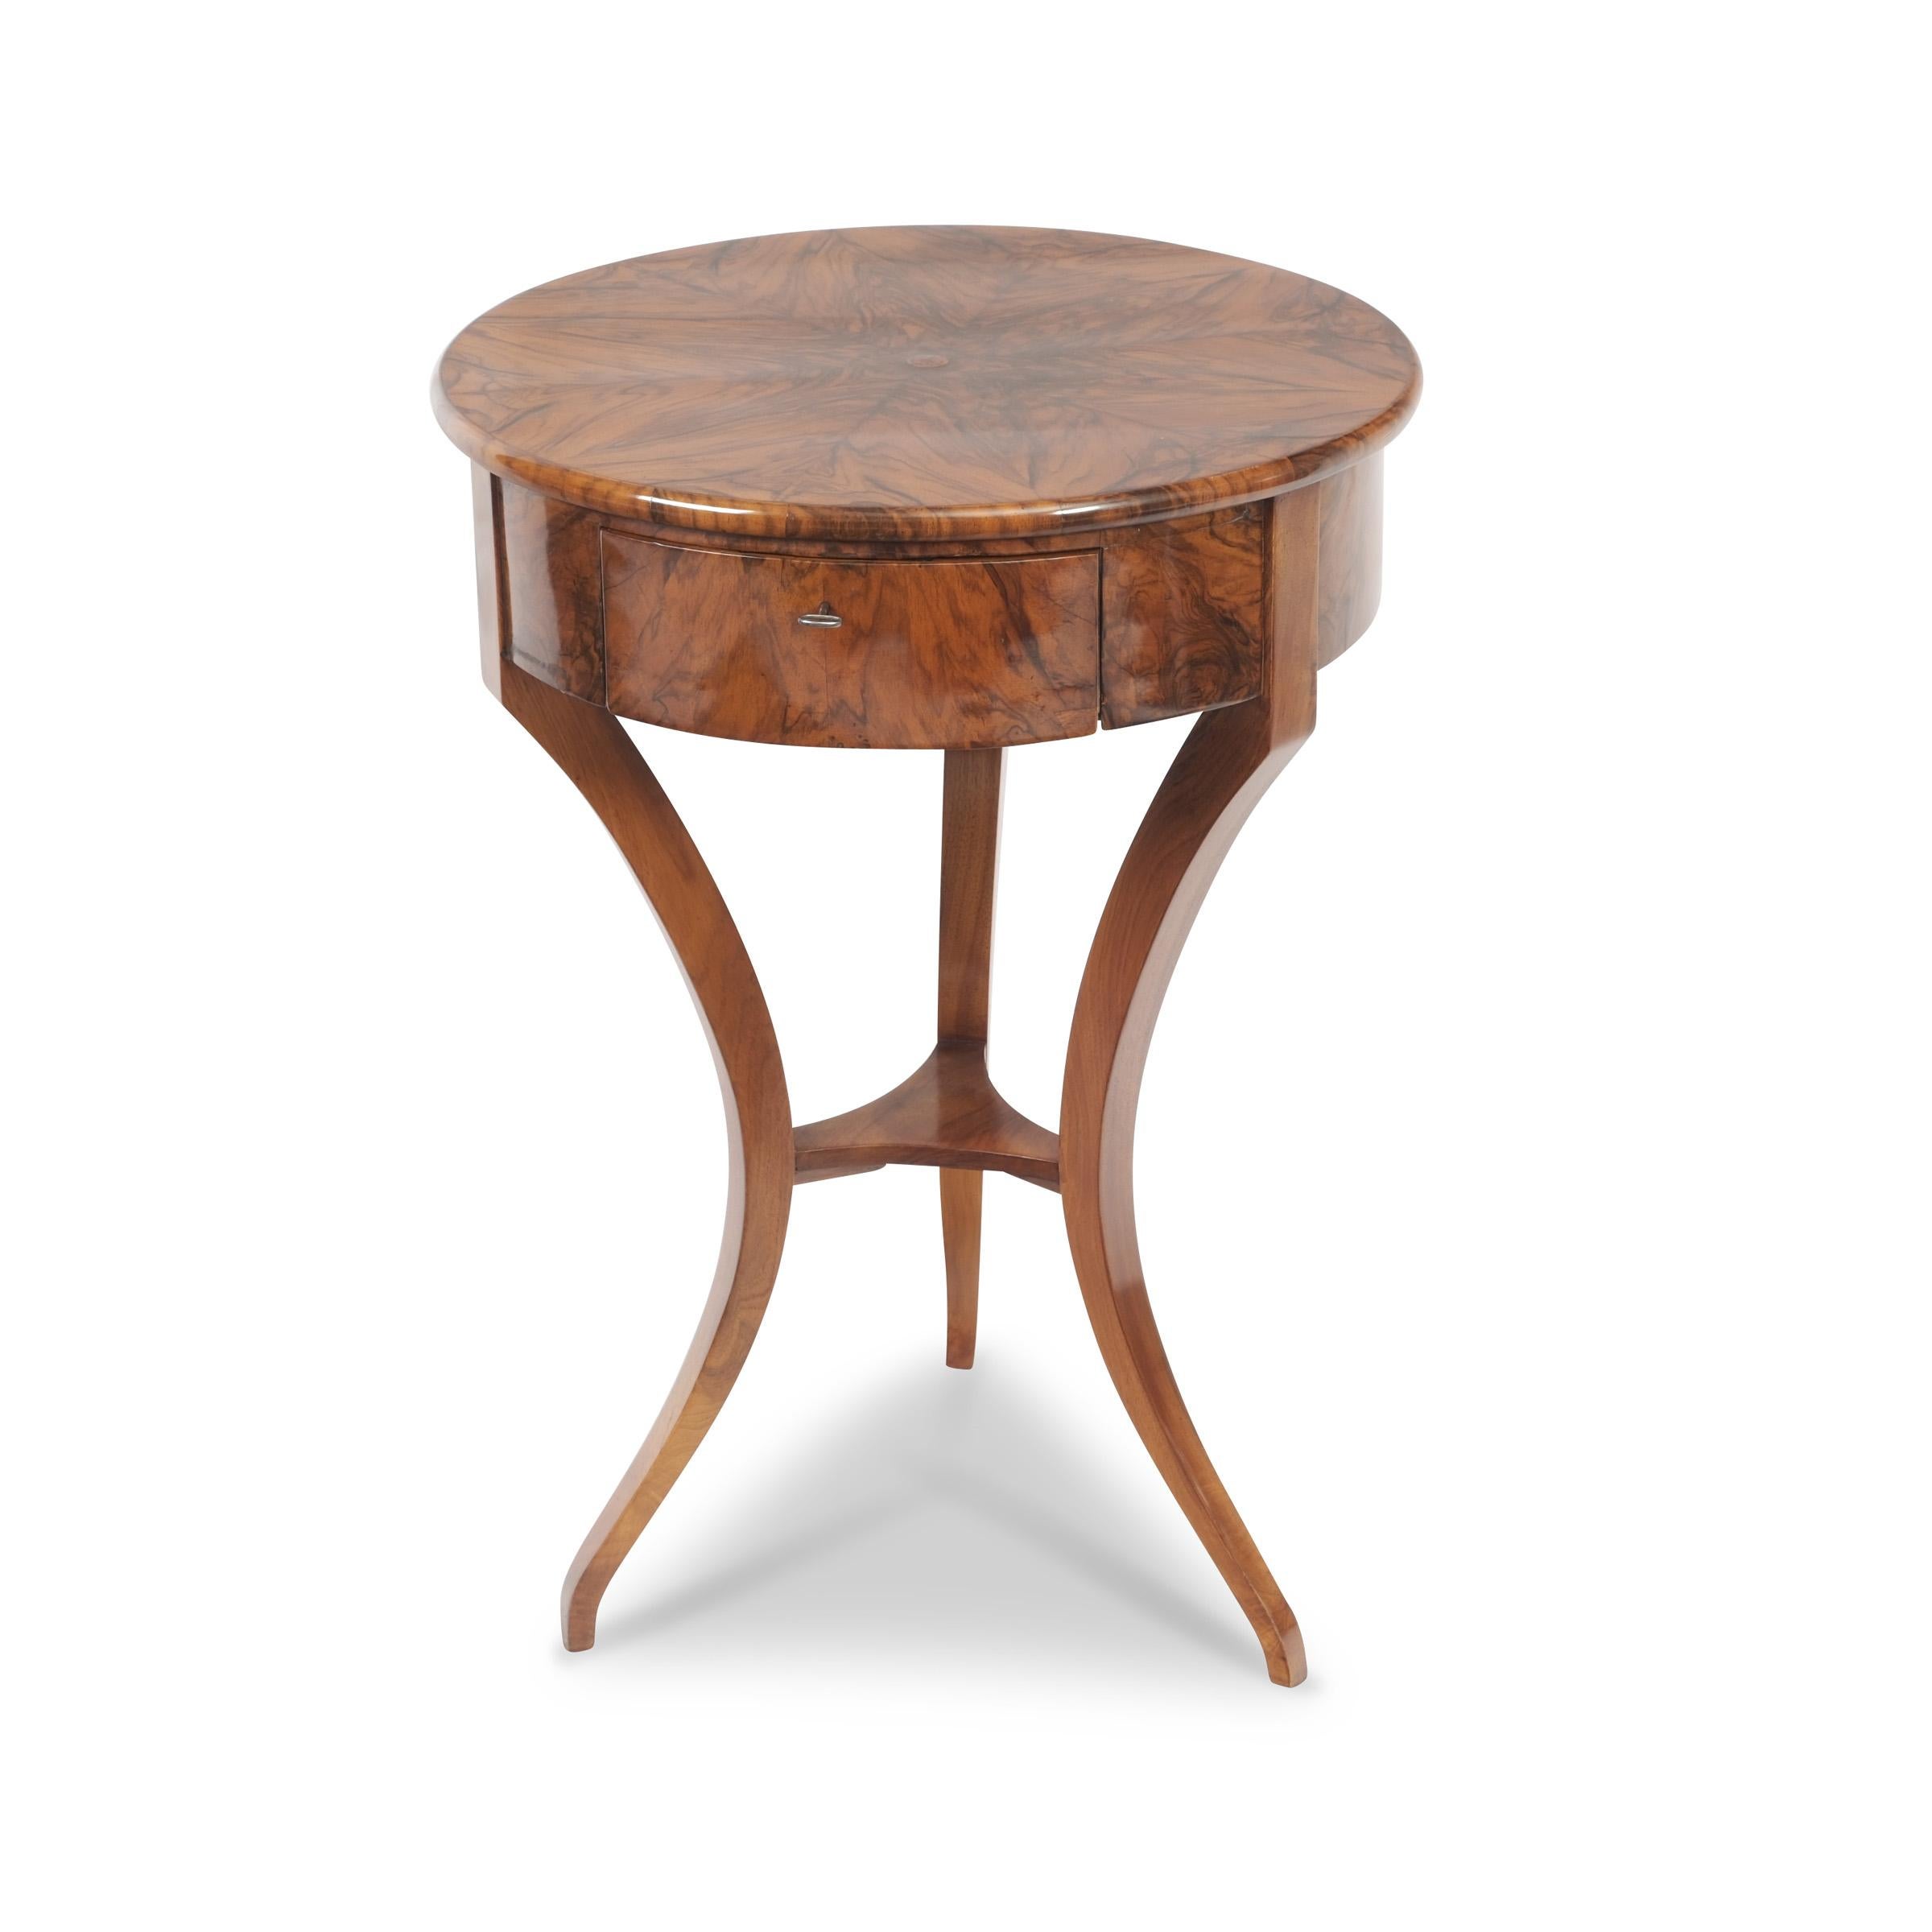 Sewing/side table
Biedermeier, around 1810/20, walnut and walnut root veneered, top star inlaid,

one drawer with inner partition, restored condition, shellac polish

 

Dimensions: height 75,5 cm - diameter: 53 cm